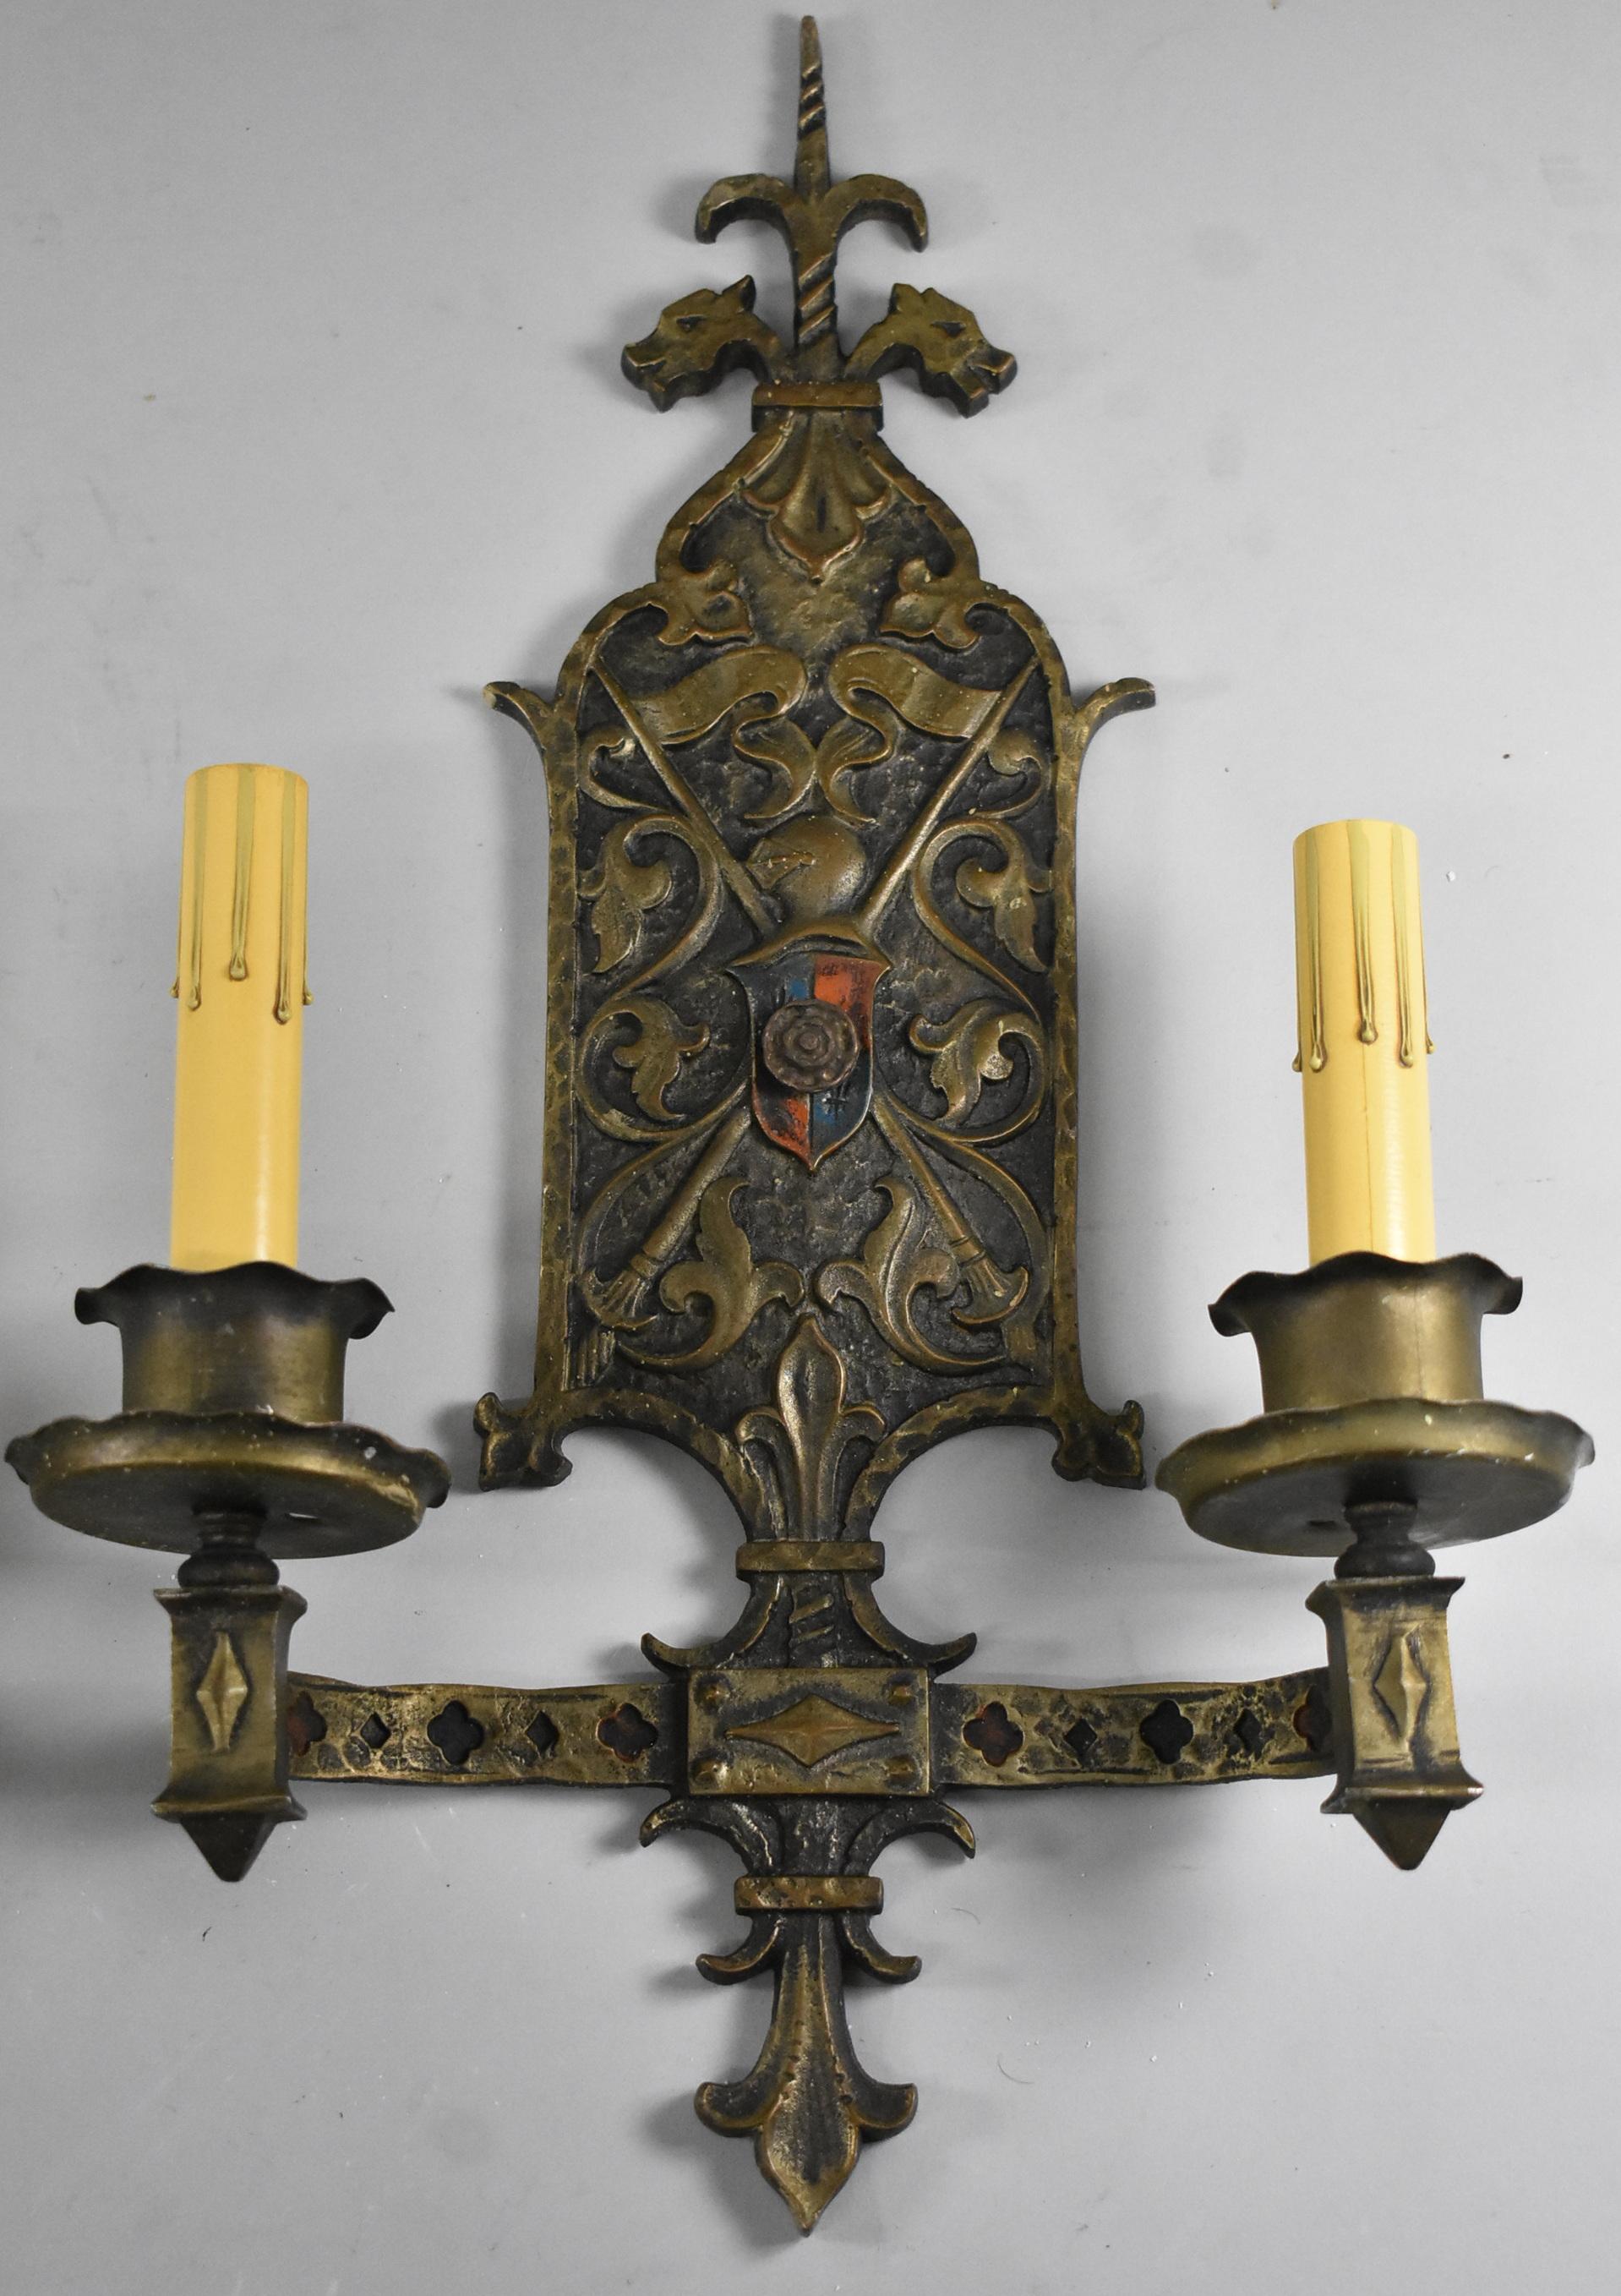 Pair of brass Gothic Revival two candelabra socket wall sconces. Original finish with aged brass patina, circa 1920s. Two dragon heads flank the top with knight and center shield.